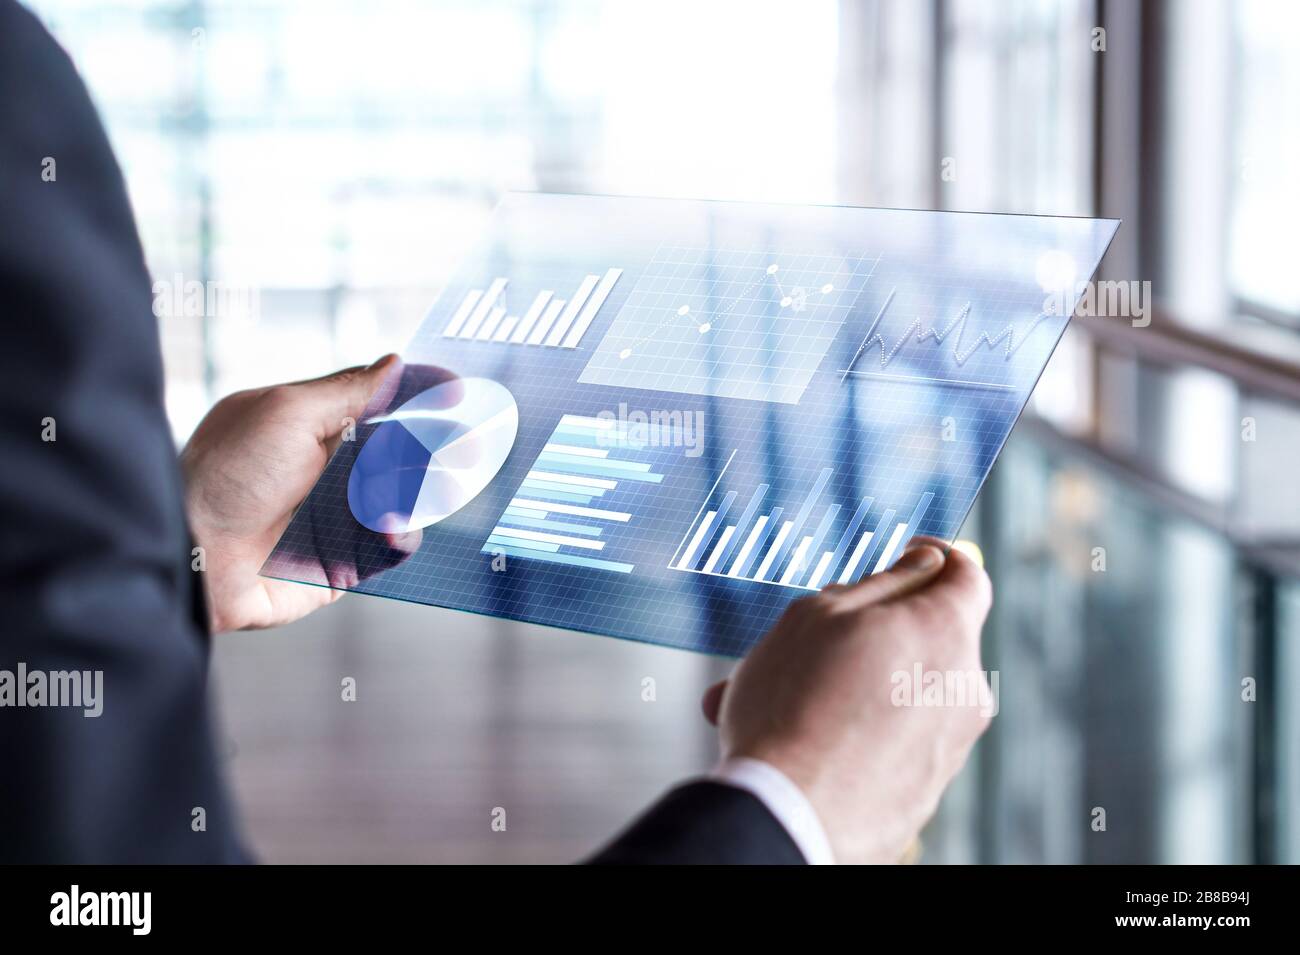 Transparent futuristic tablet. Business man using virtual touch screen. Modern mobile technology in accounting, finance, data and analytics. Stock Photo